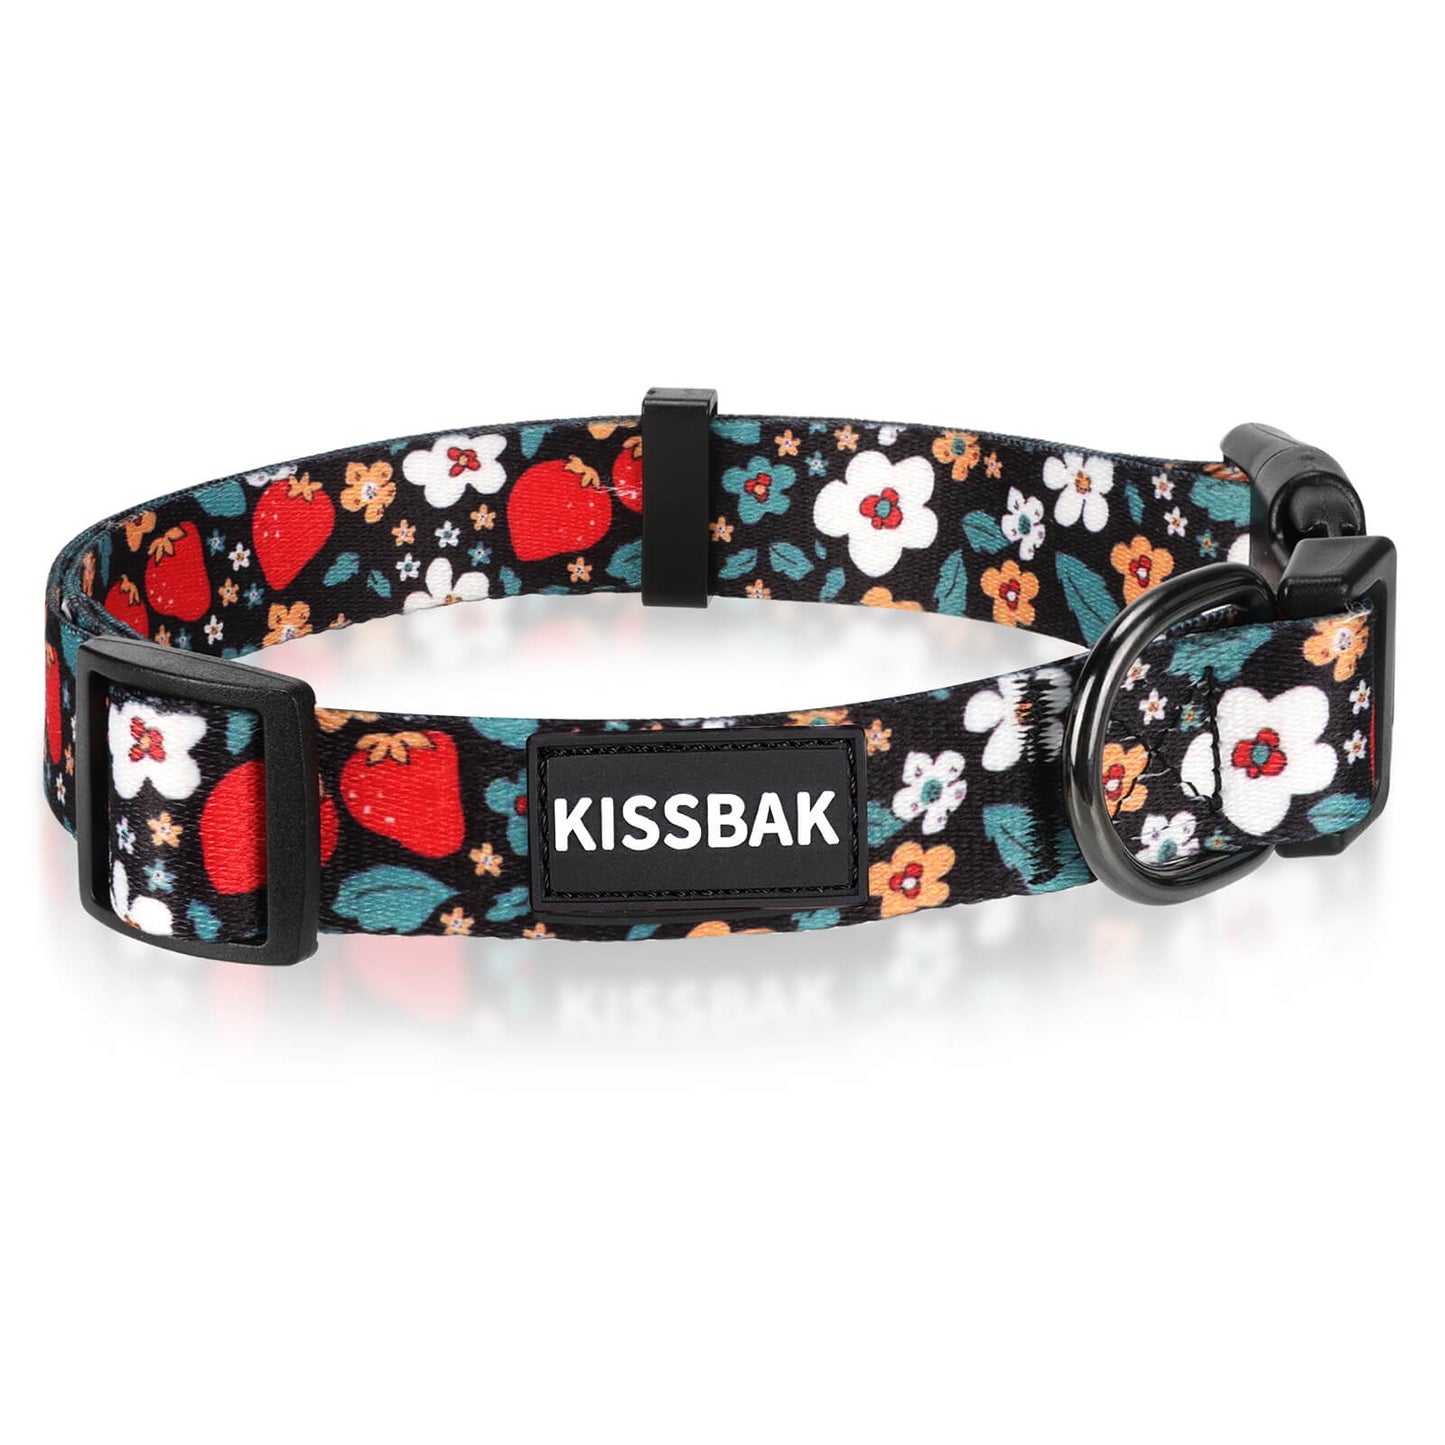 KISSBAK Dog Collar for Small-Medium-Large Dogs - Special Design Cute Girl Dog Pet Collar Soft Adjustable Fancy Floral Girl Puppy Dog Collars Strawberry